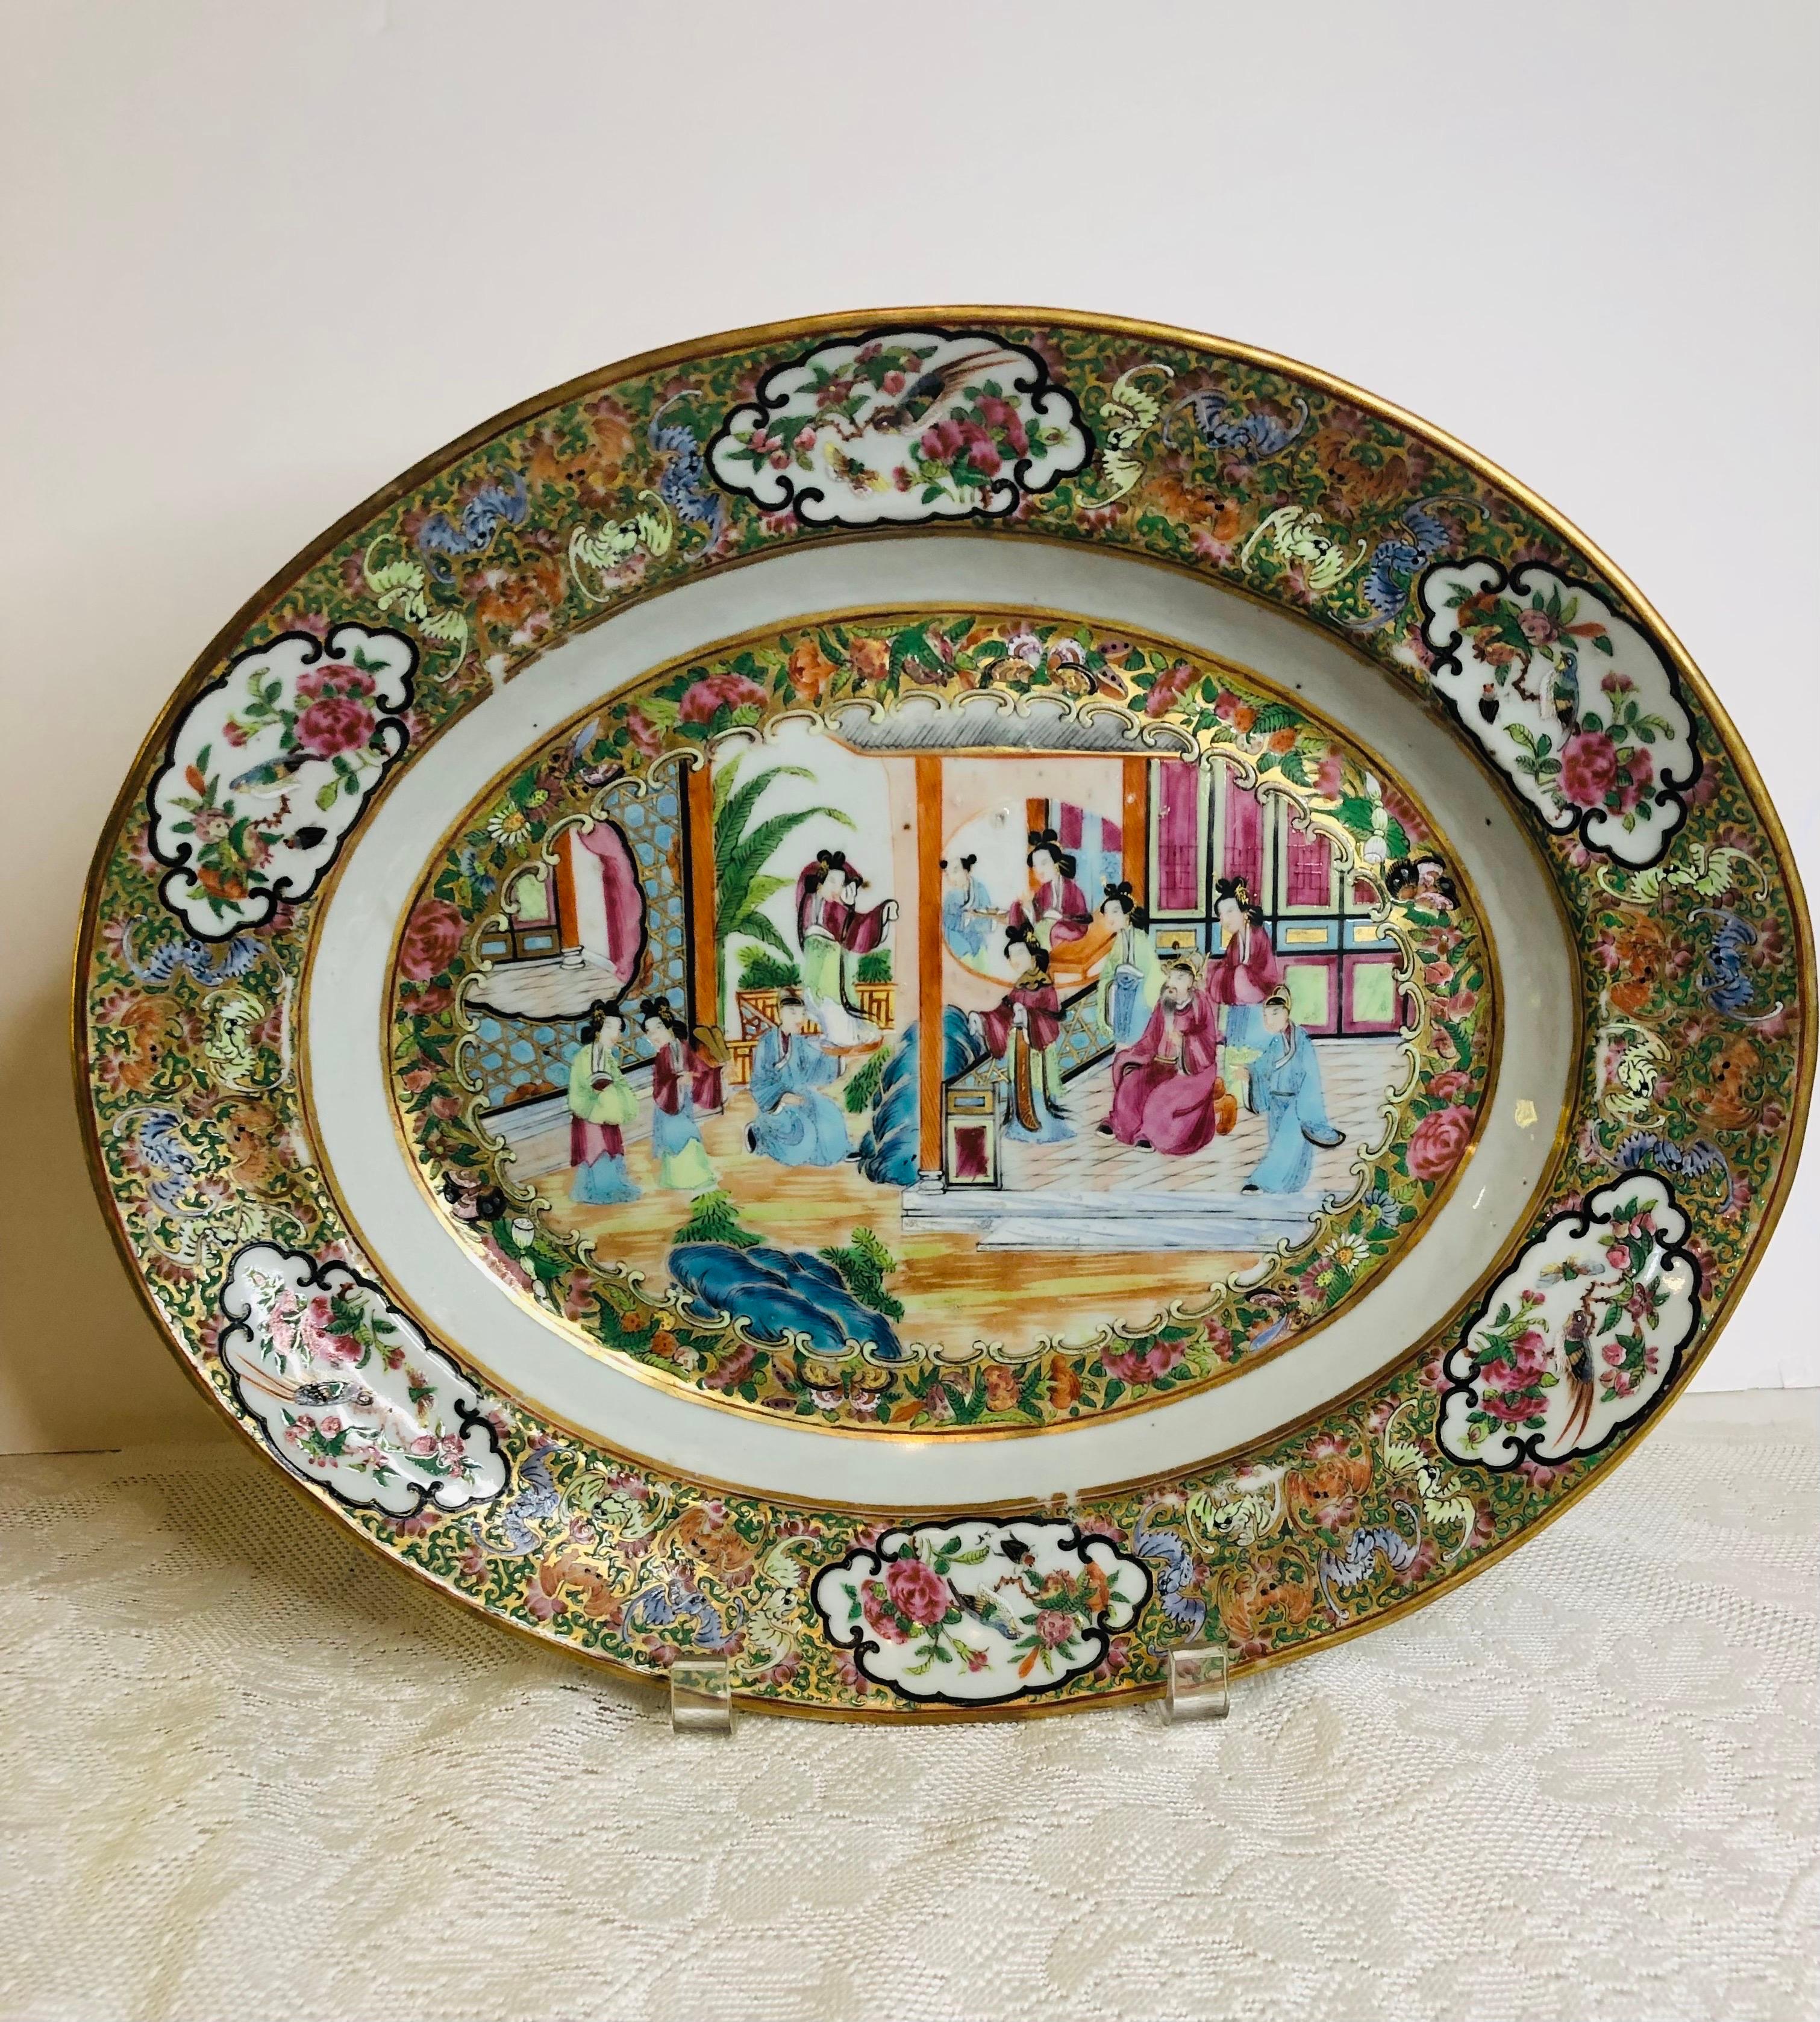 Porcelain Rose Canton Chinese Export Platter Painted with Gold and Enamel Decoration